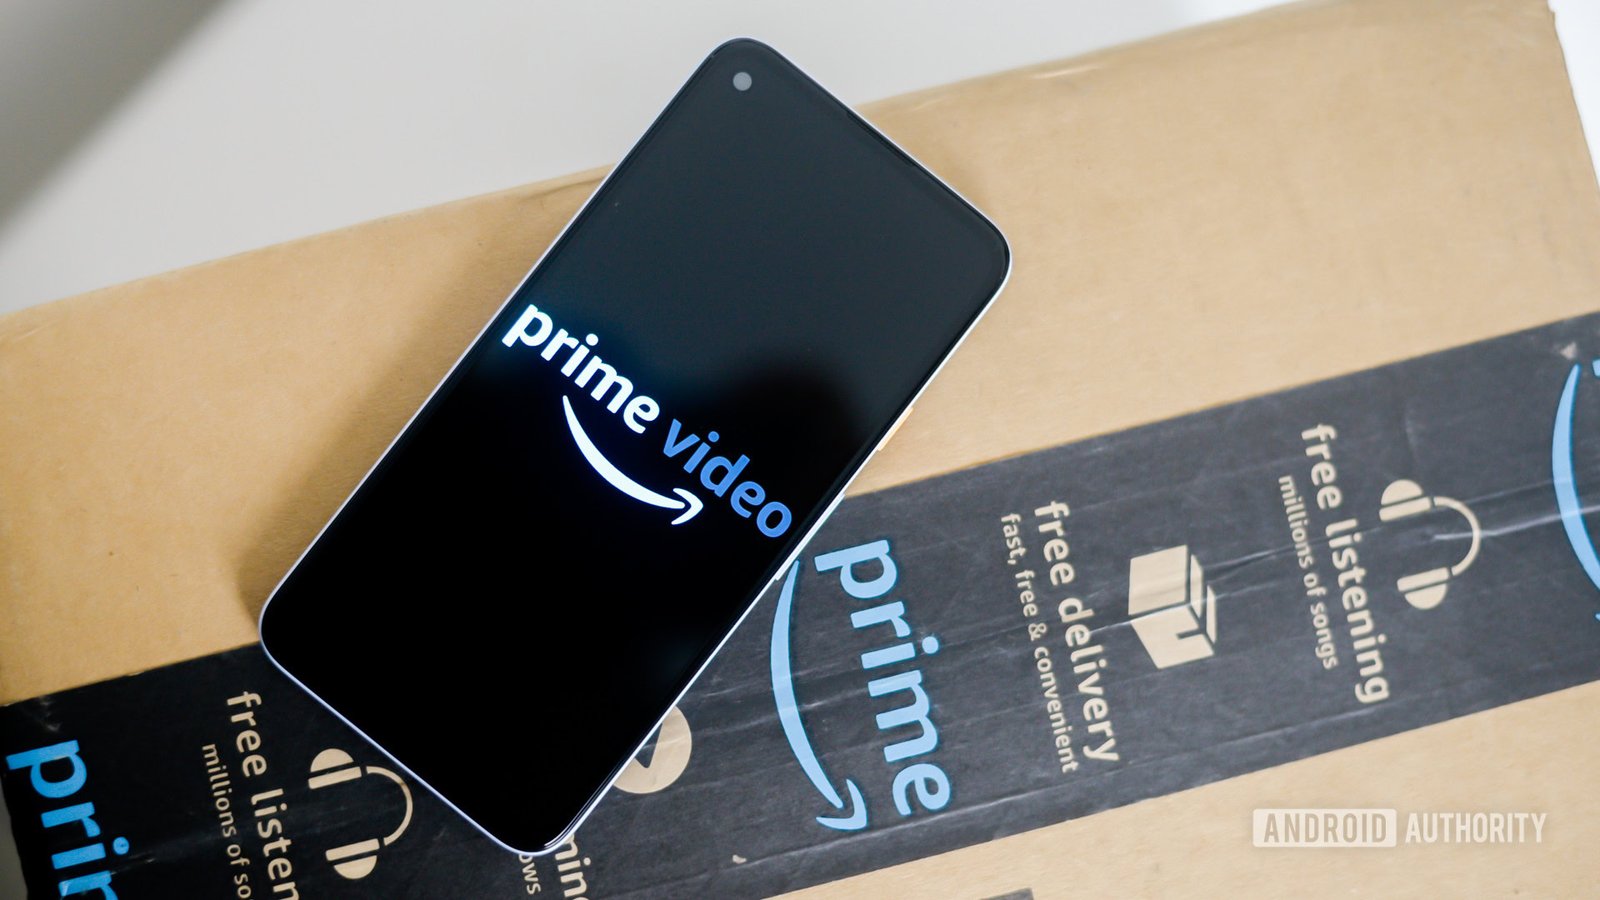 Amazon wants you to go shopping when you pause a show on Prime Video, despite a subscription